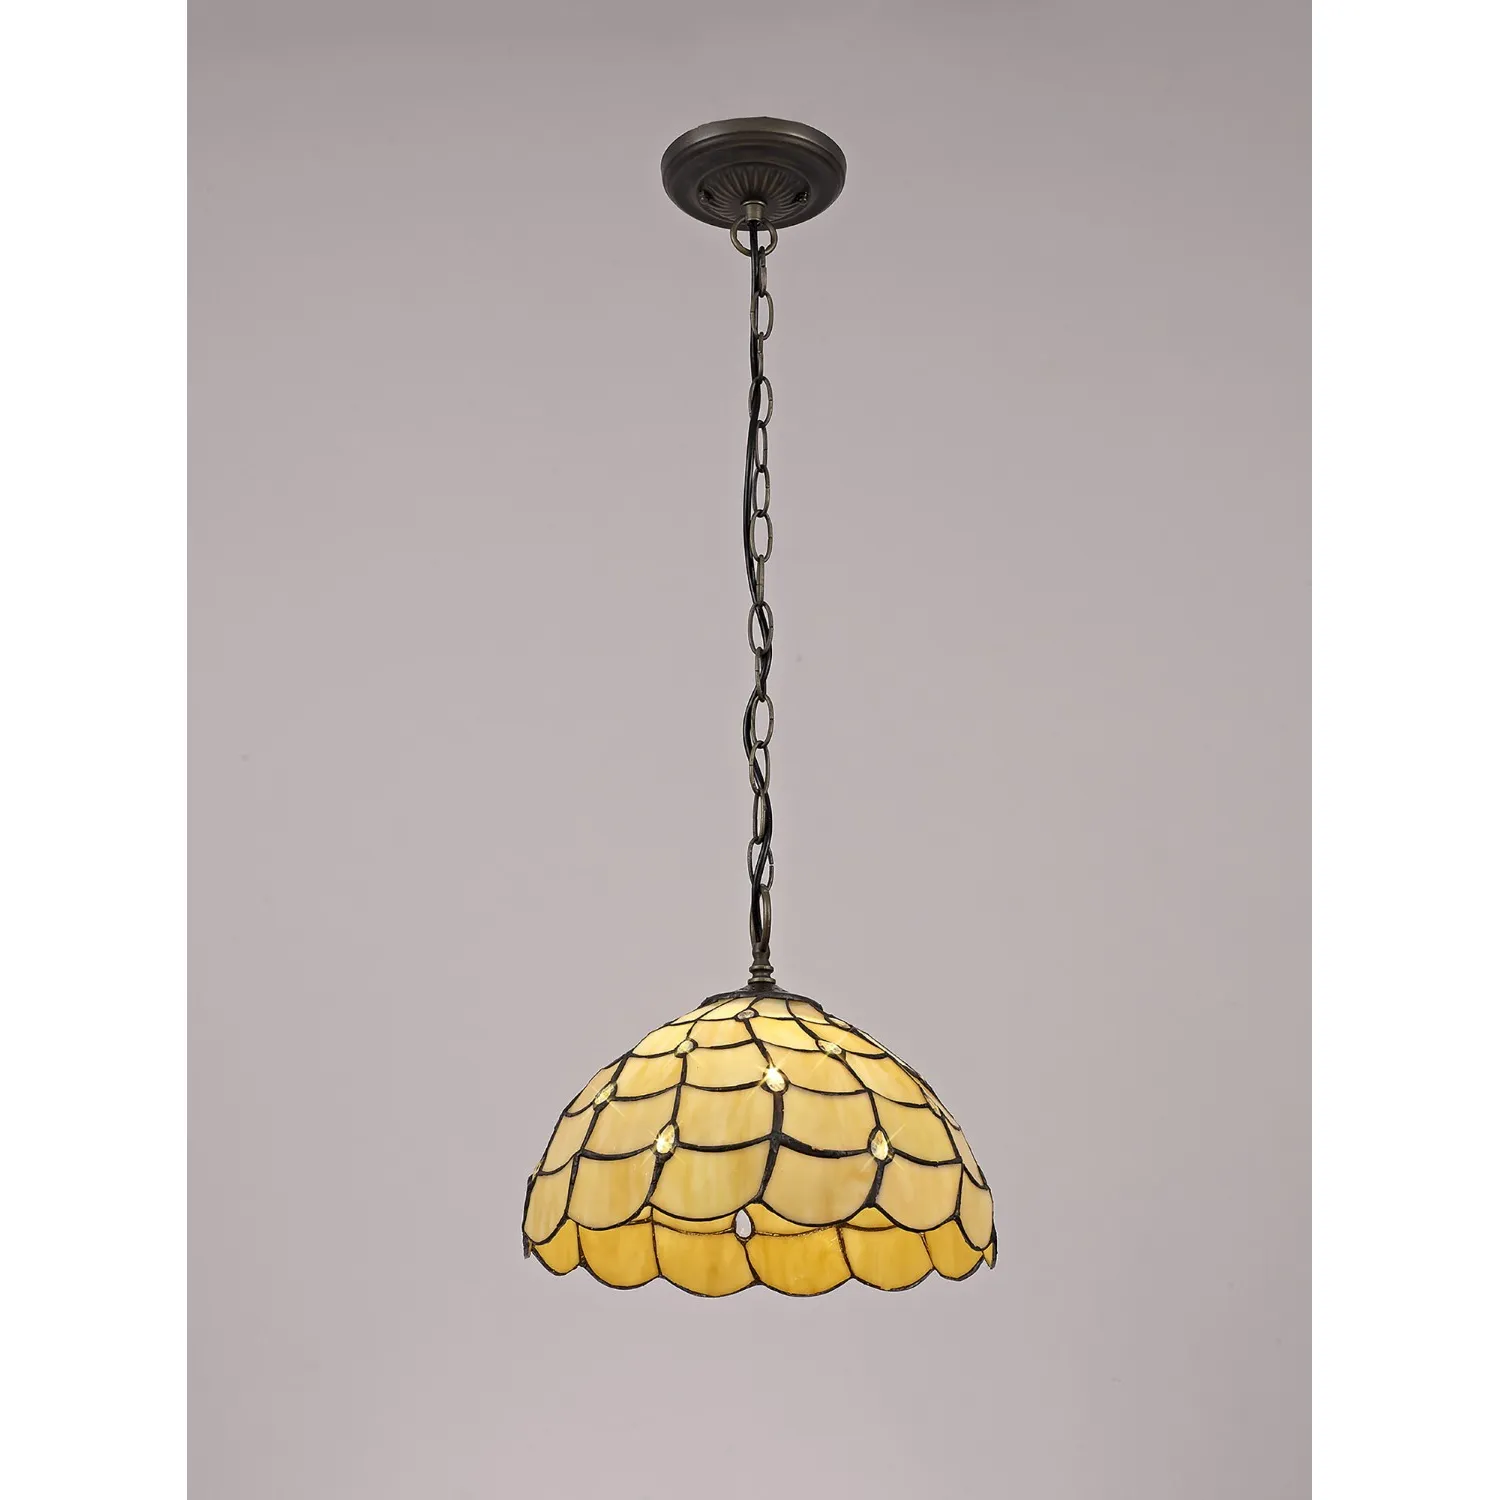 Stratford 1 Light Downlighter Pendant E27 With 30cm Tiffany Shade, Beige Clear Crystal Aged Antique Brass